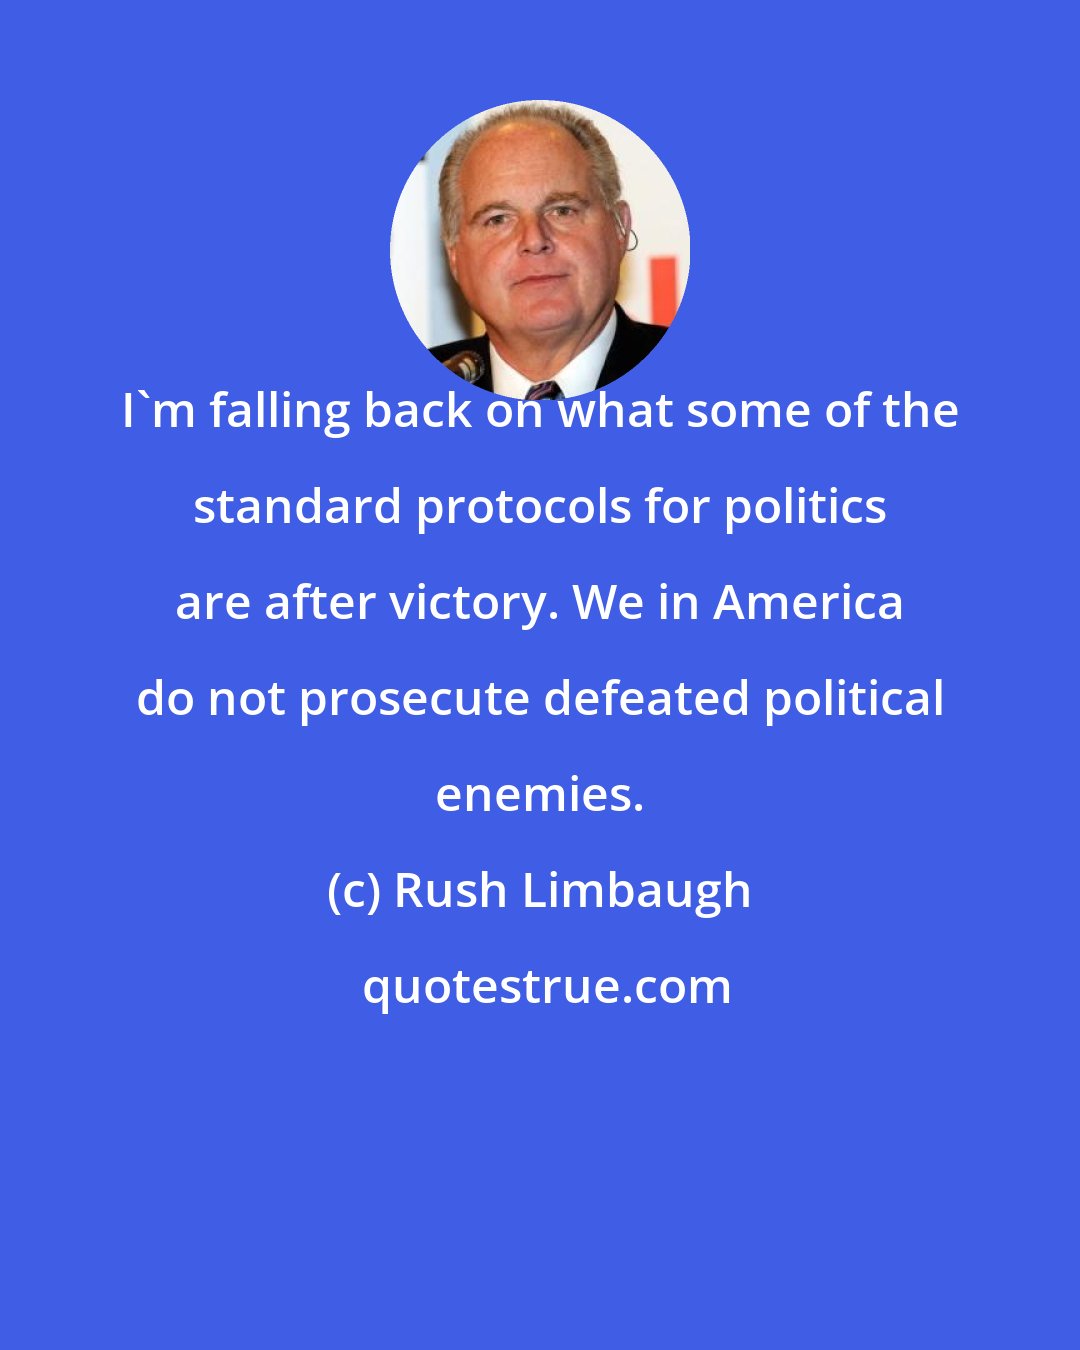 Rush Limbaugh: I'm falling back on what some of the standard protocols for politics are after victory. We in America do not prosecute defeated political enemies.